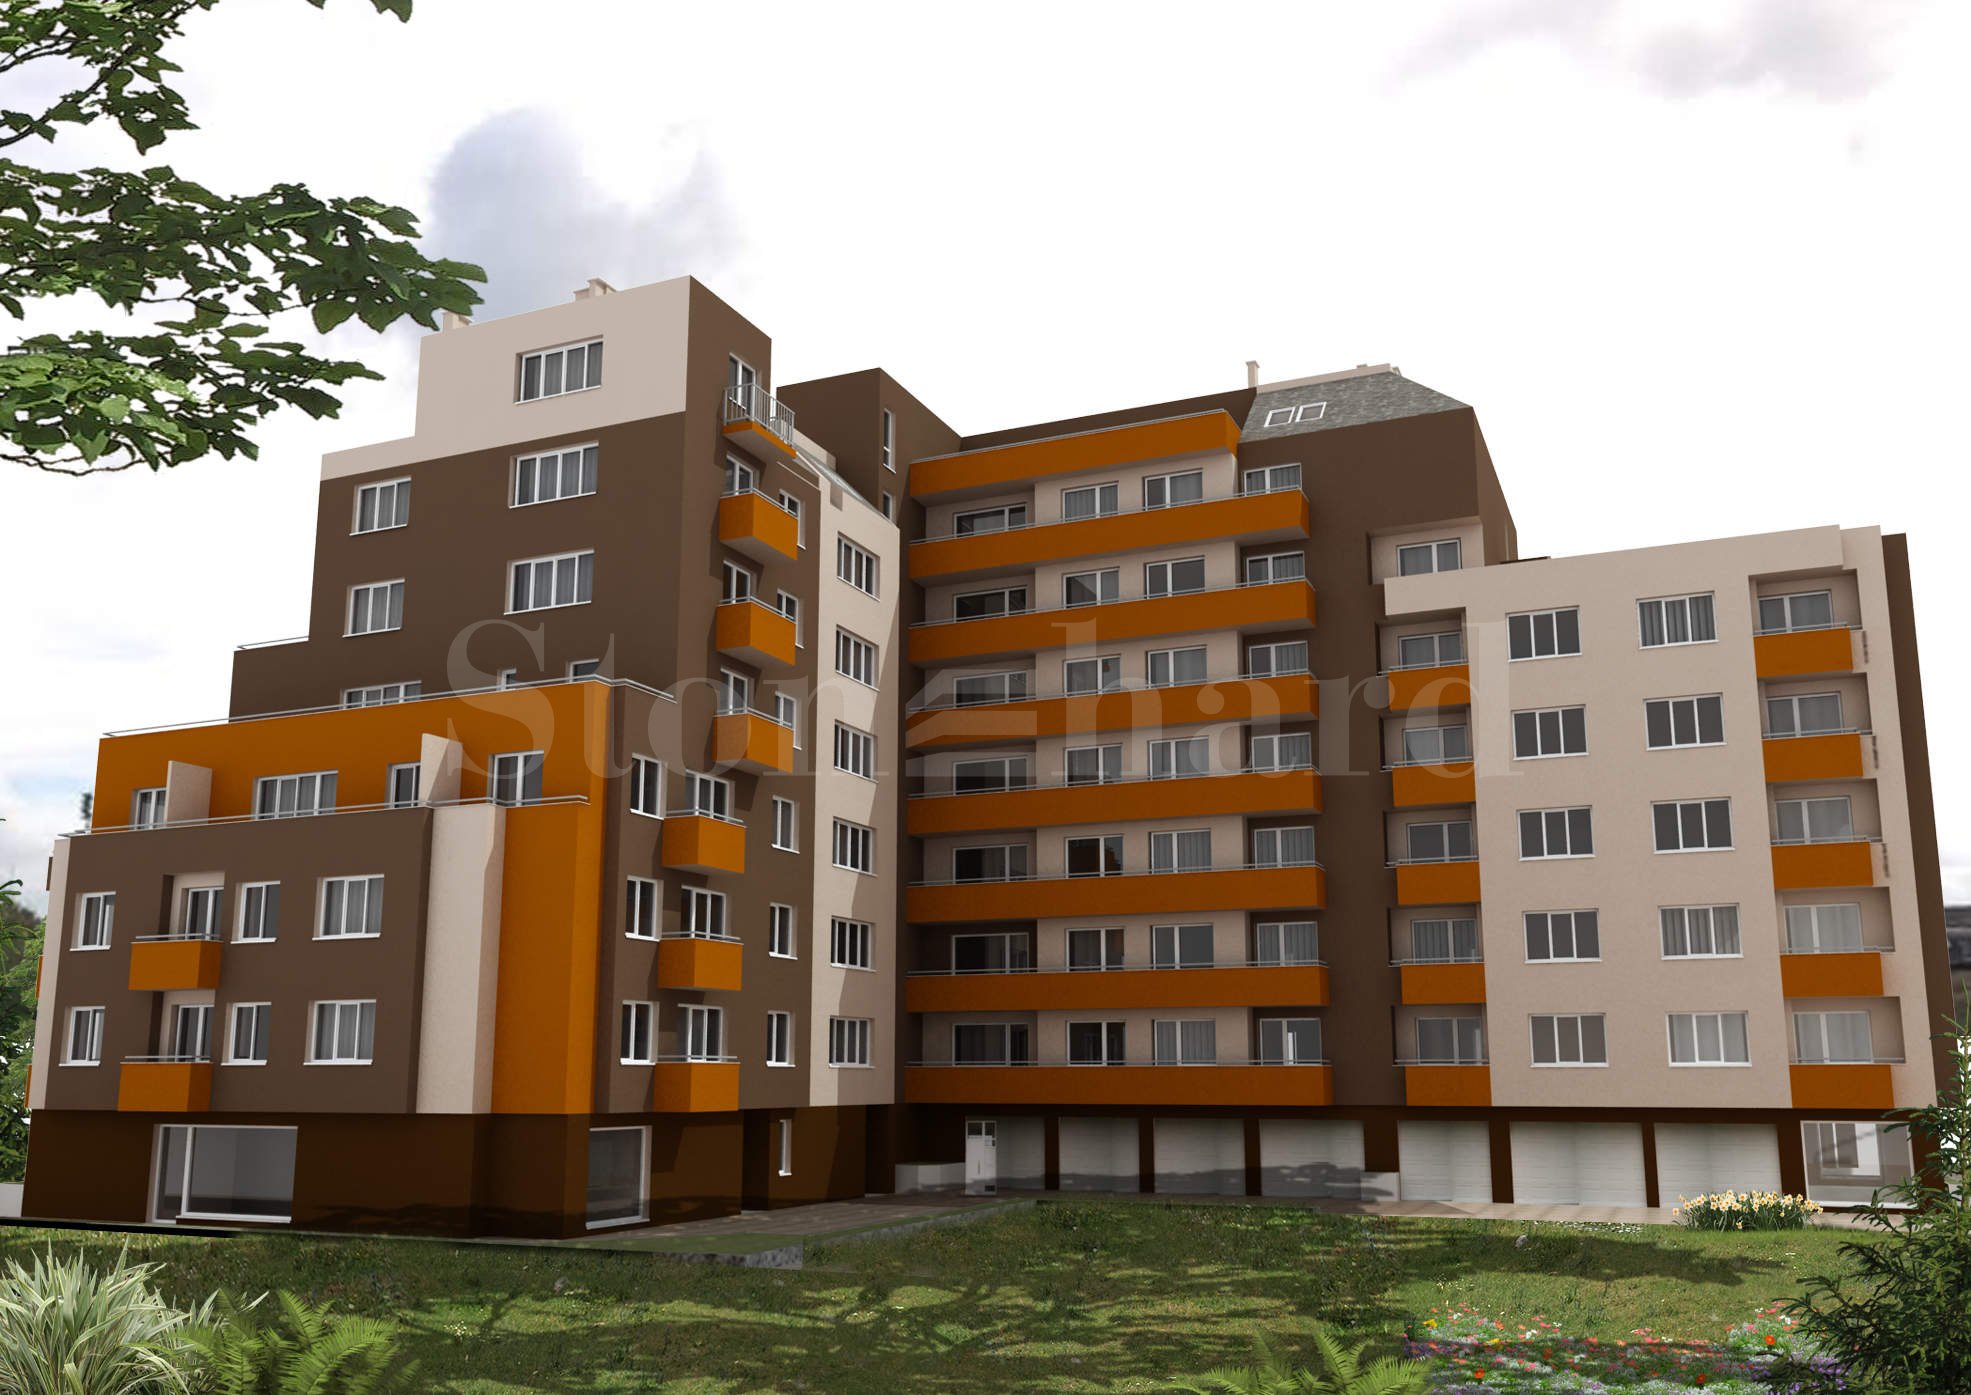 Modern residential complex with city apartments2 - Stonehard